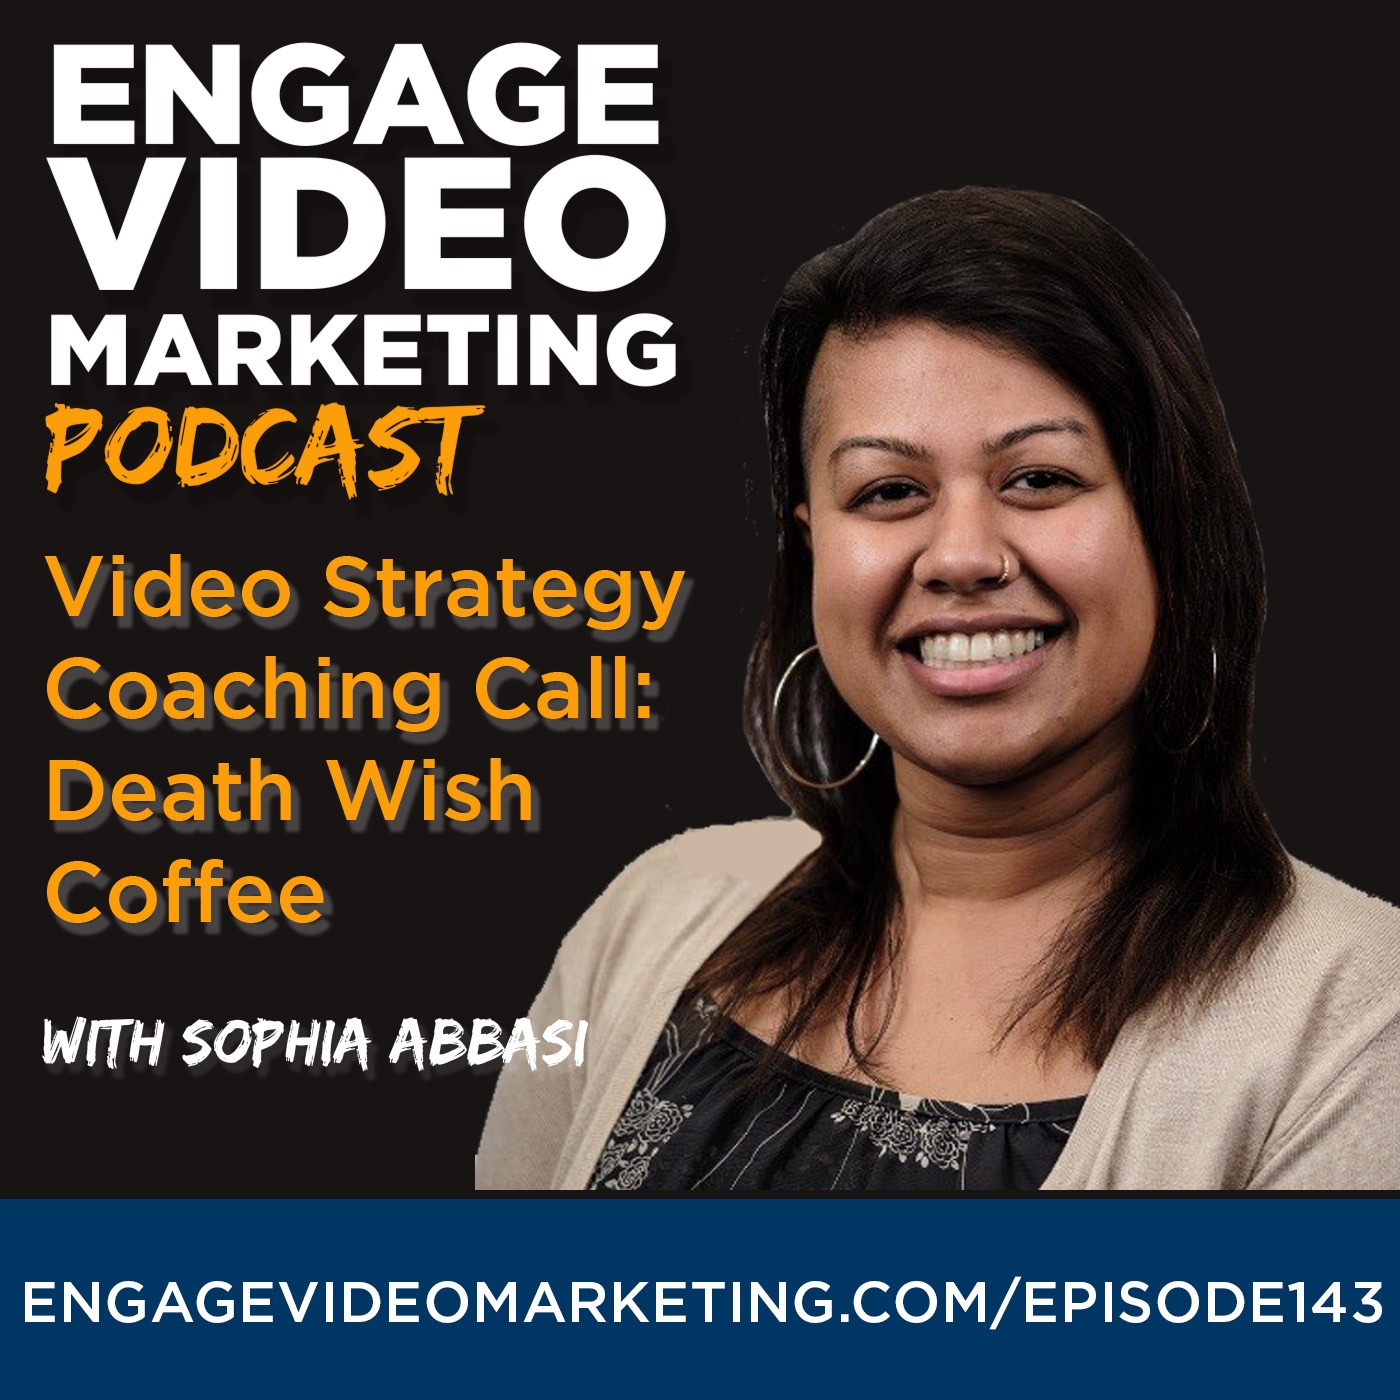 Video Strategy Coaching Call with Sophia Abbasi from Death Wish Coffee